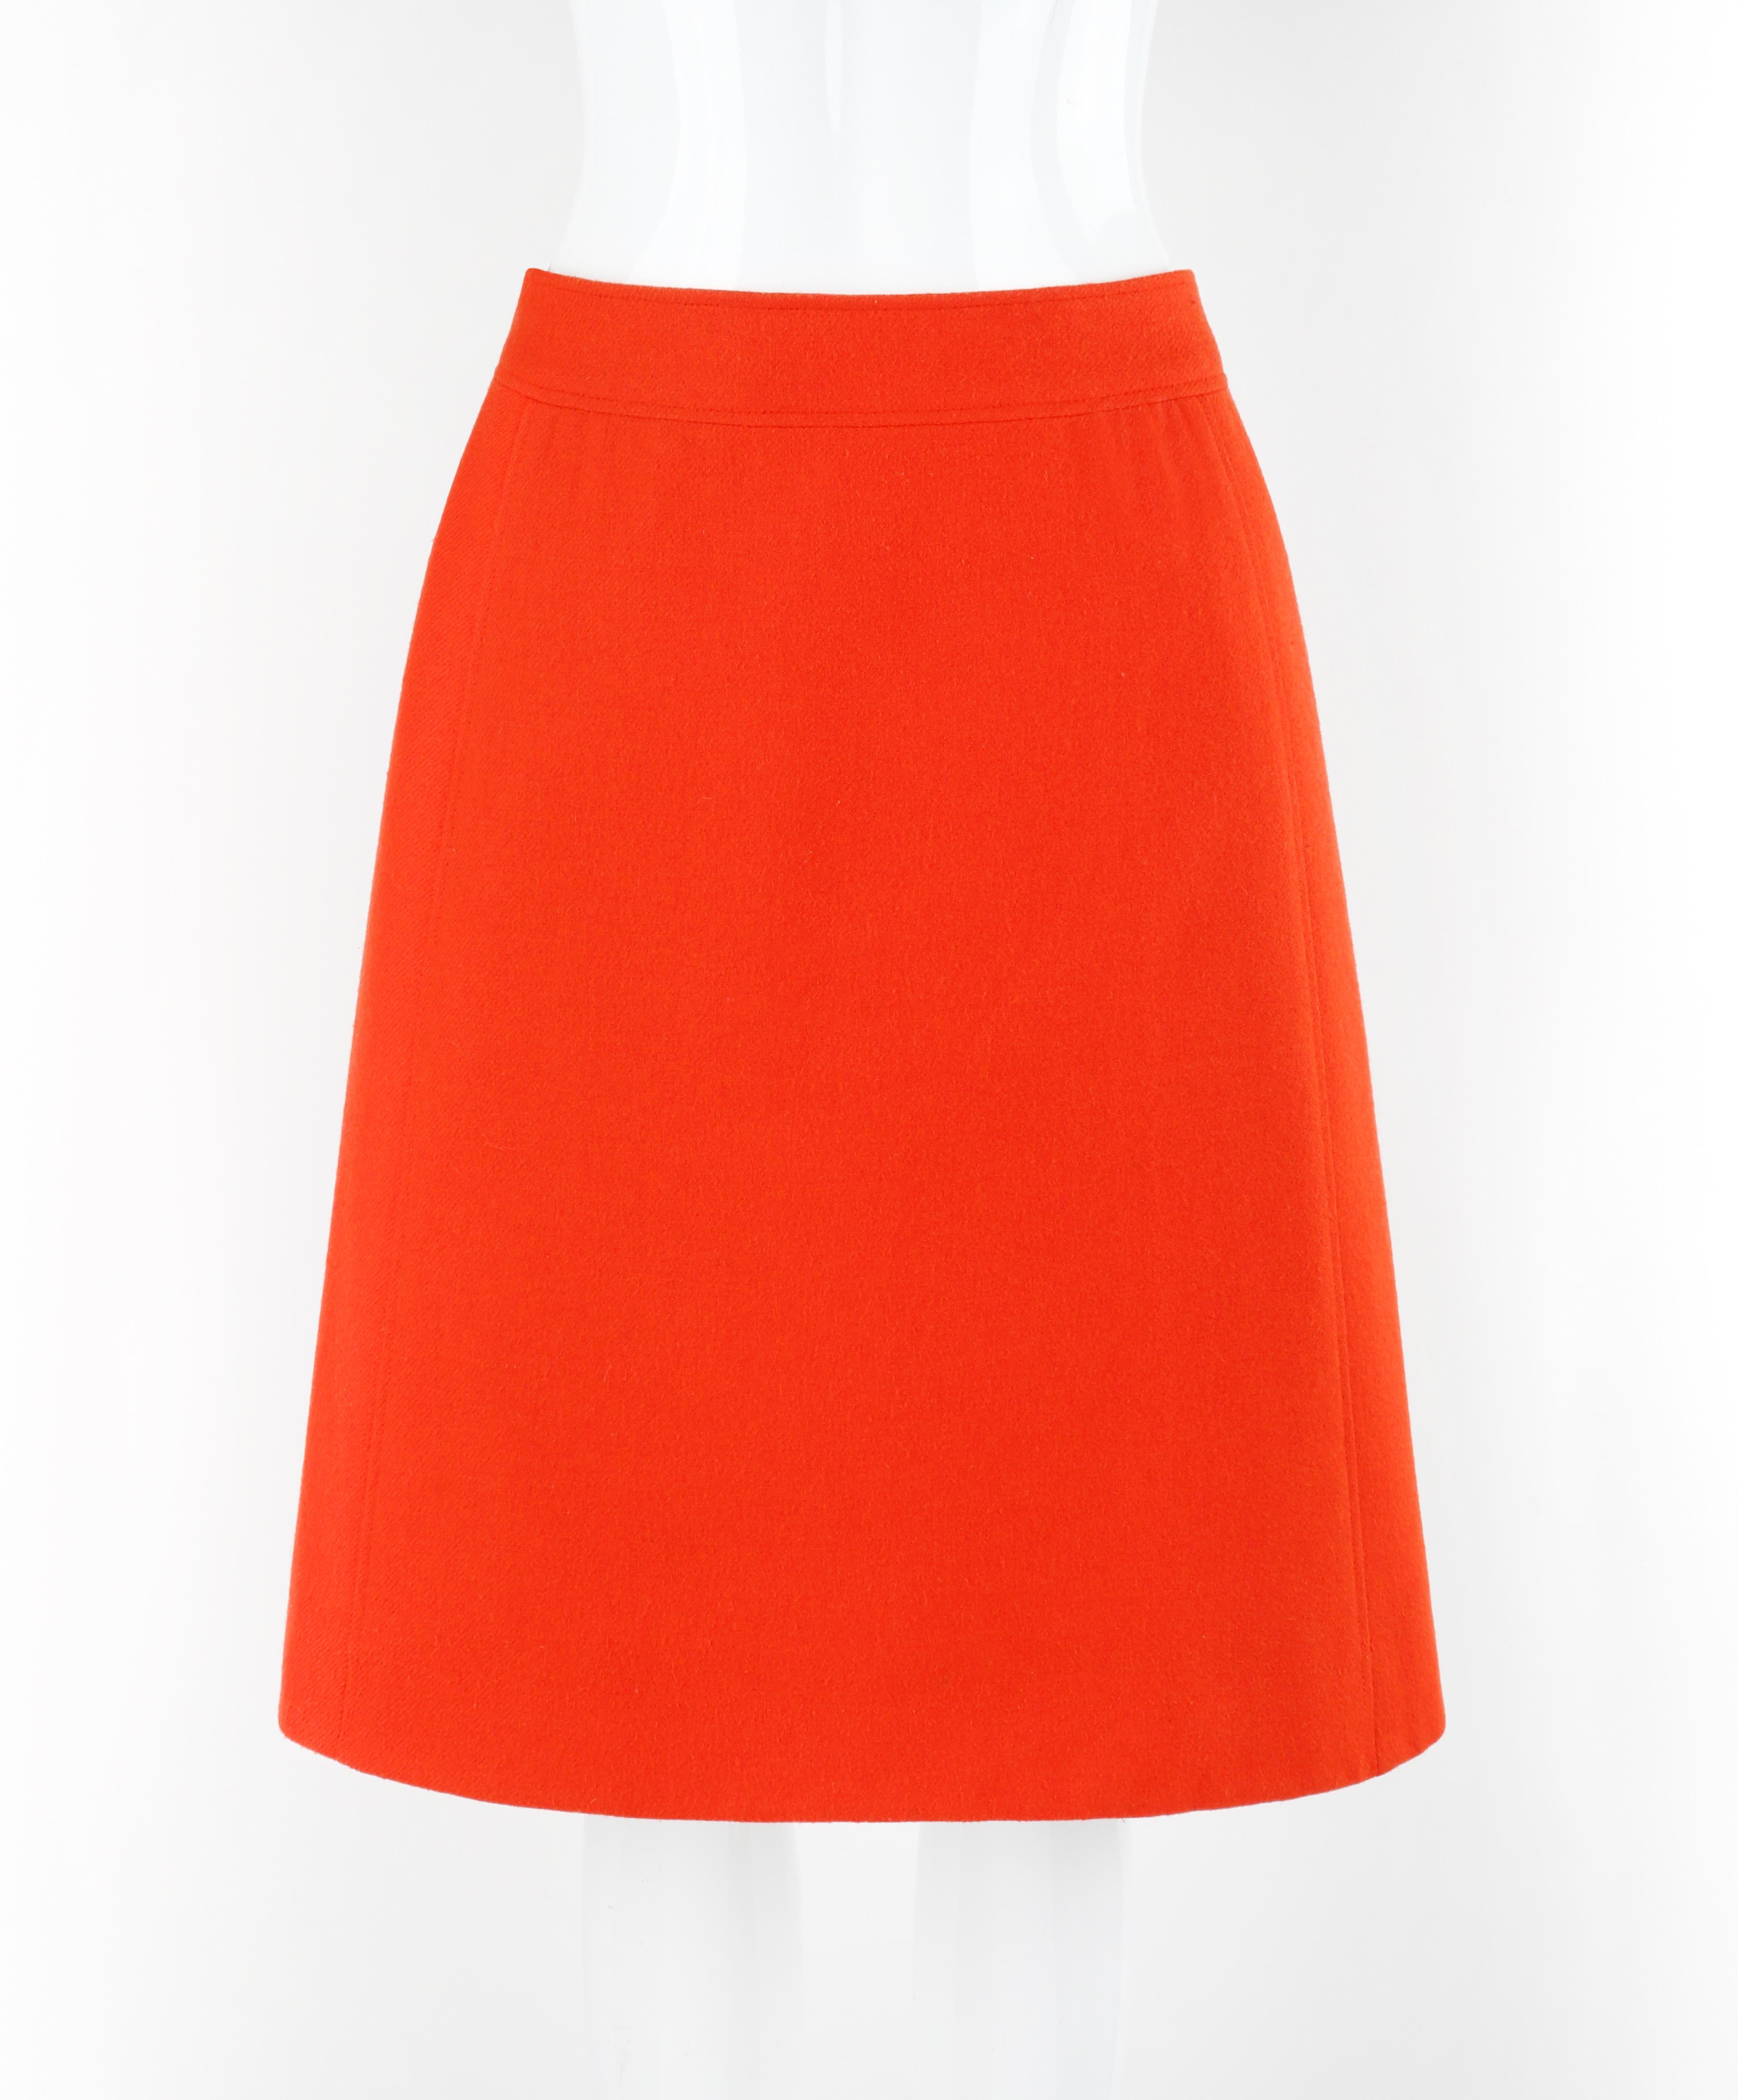 COURREGES c.1970's Orange Wool Lined Classic Tailored A-Line Knee Length Skirt

Brand / Manufacturer: Courreges
Circa: 1970's
Label: Numbered - 0042055
Designer: Andre Courreges
Style: A-Line knee length skirt
Color(s): Orange, white
Lined: